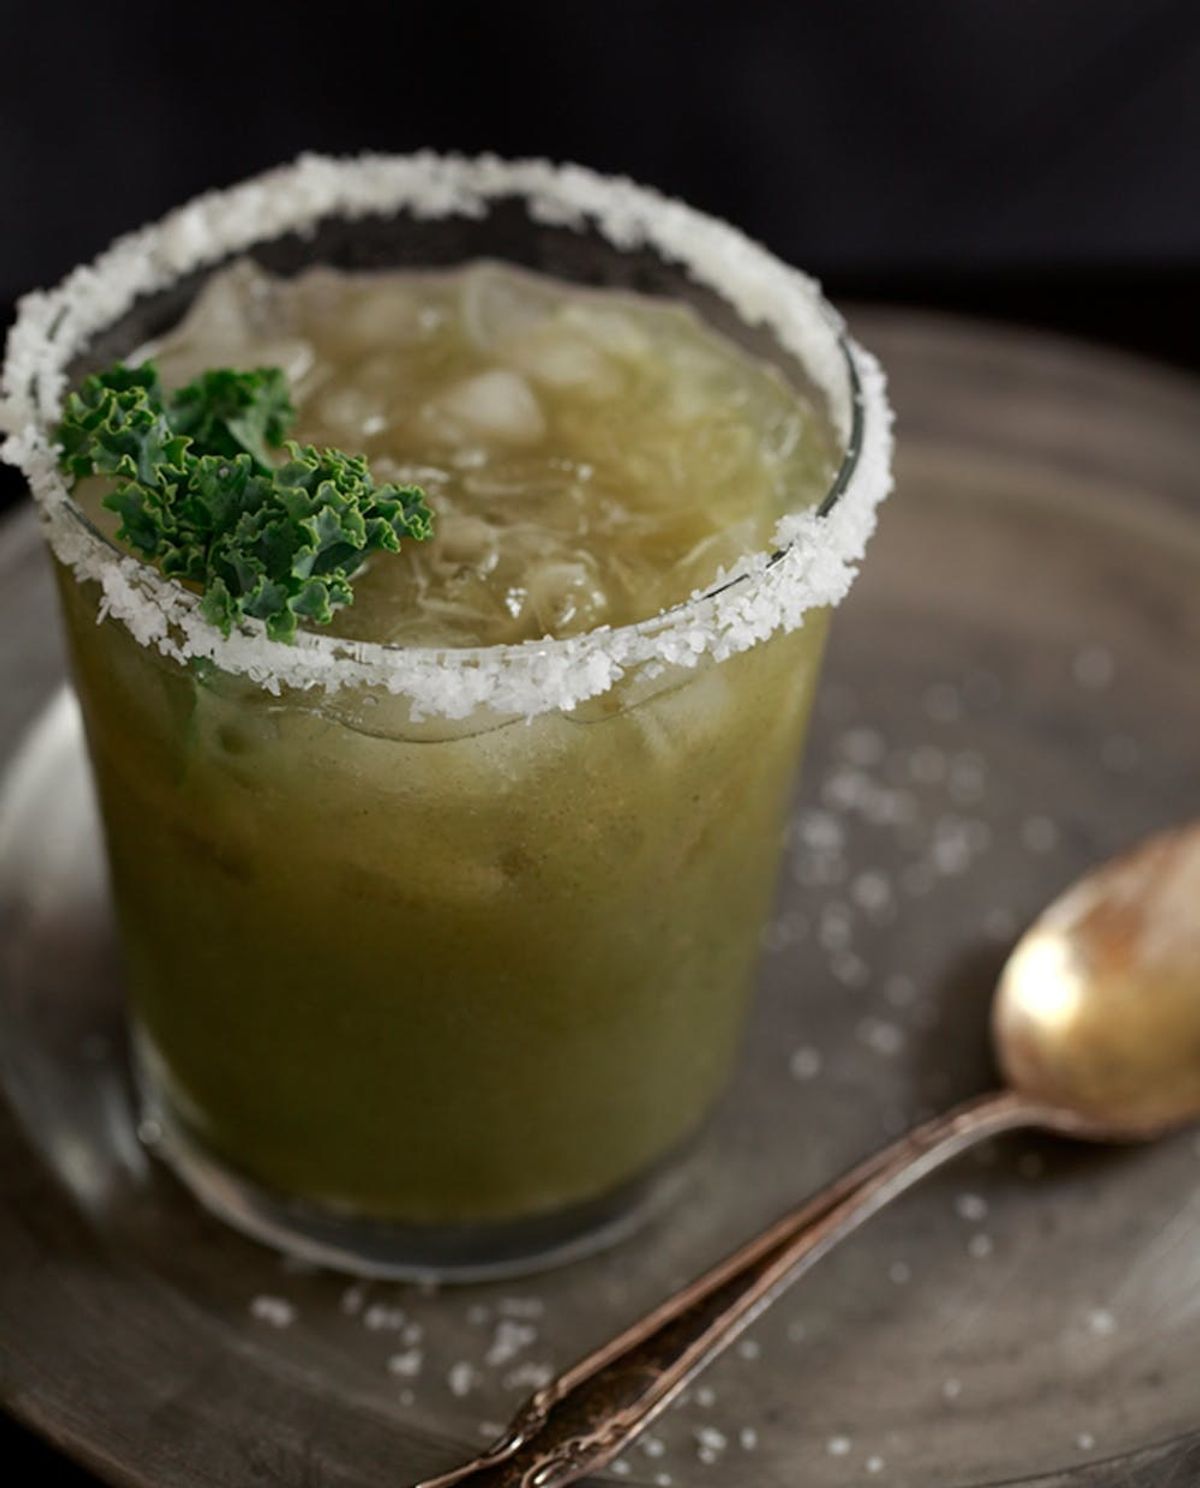 Kale Margaritas and 10 Other Cocktails That Win “Best Sip”